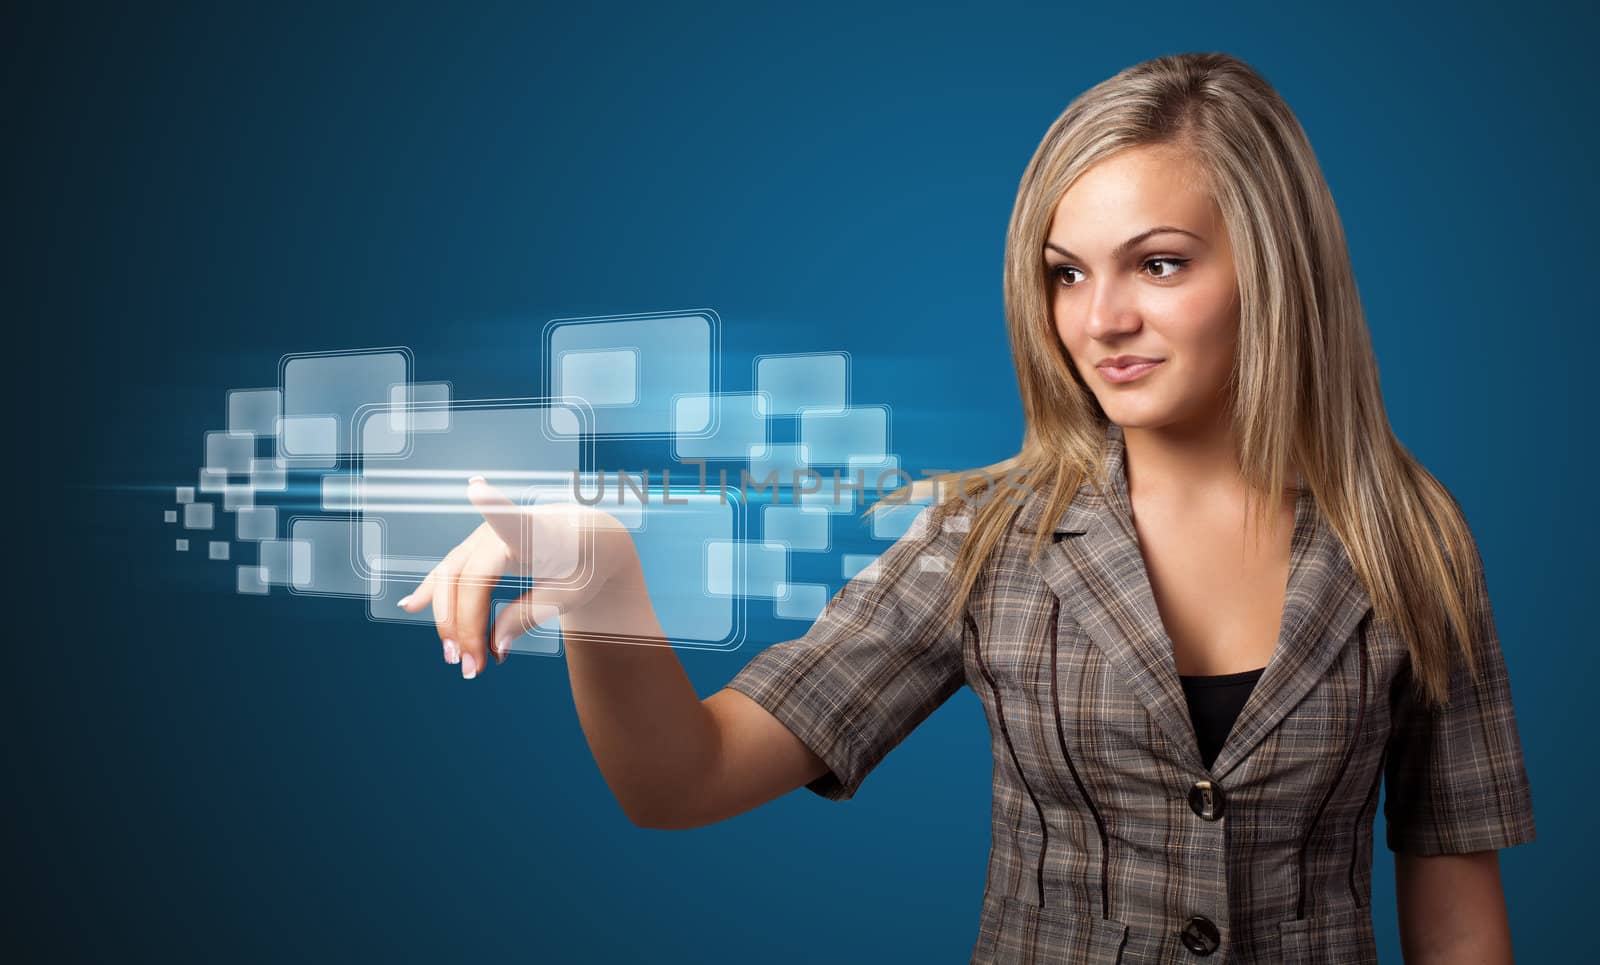 Businesswoman pressing high tech type of modern buttons on a virtual background